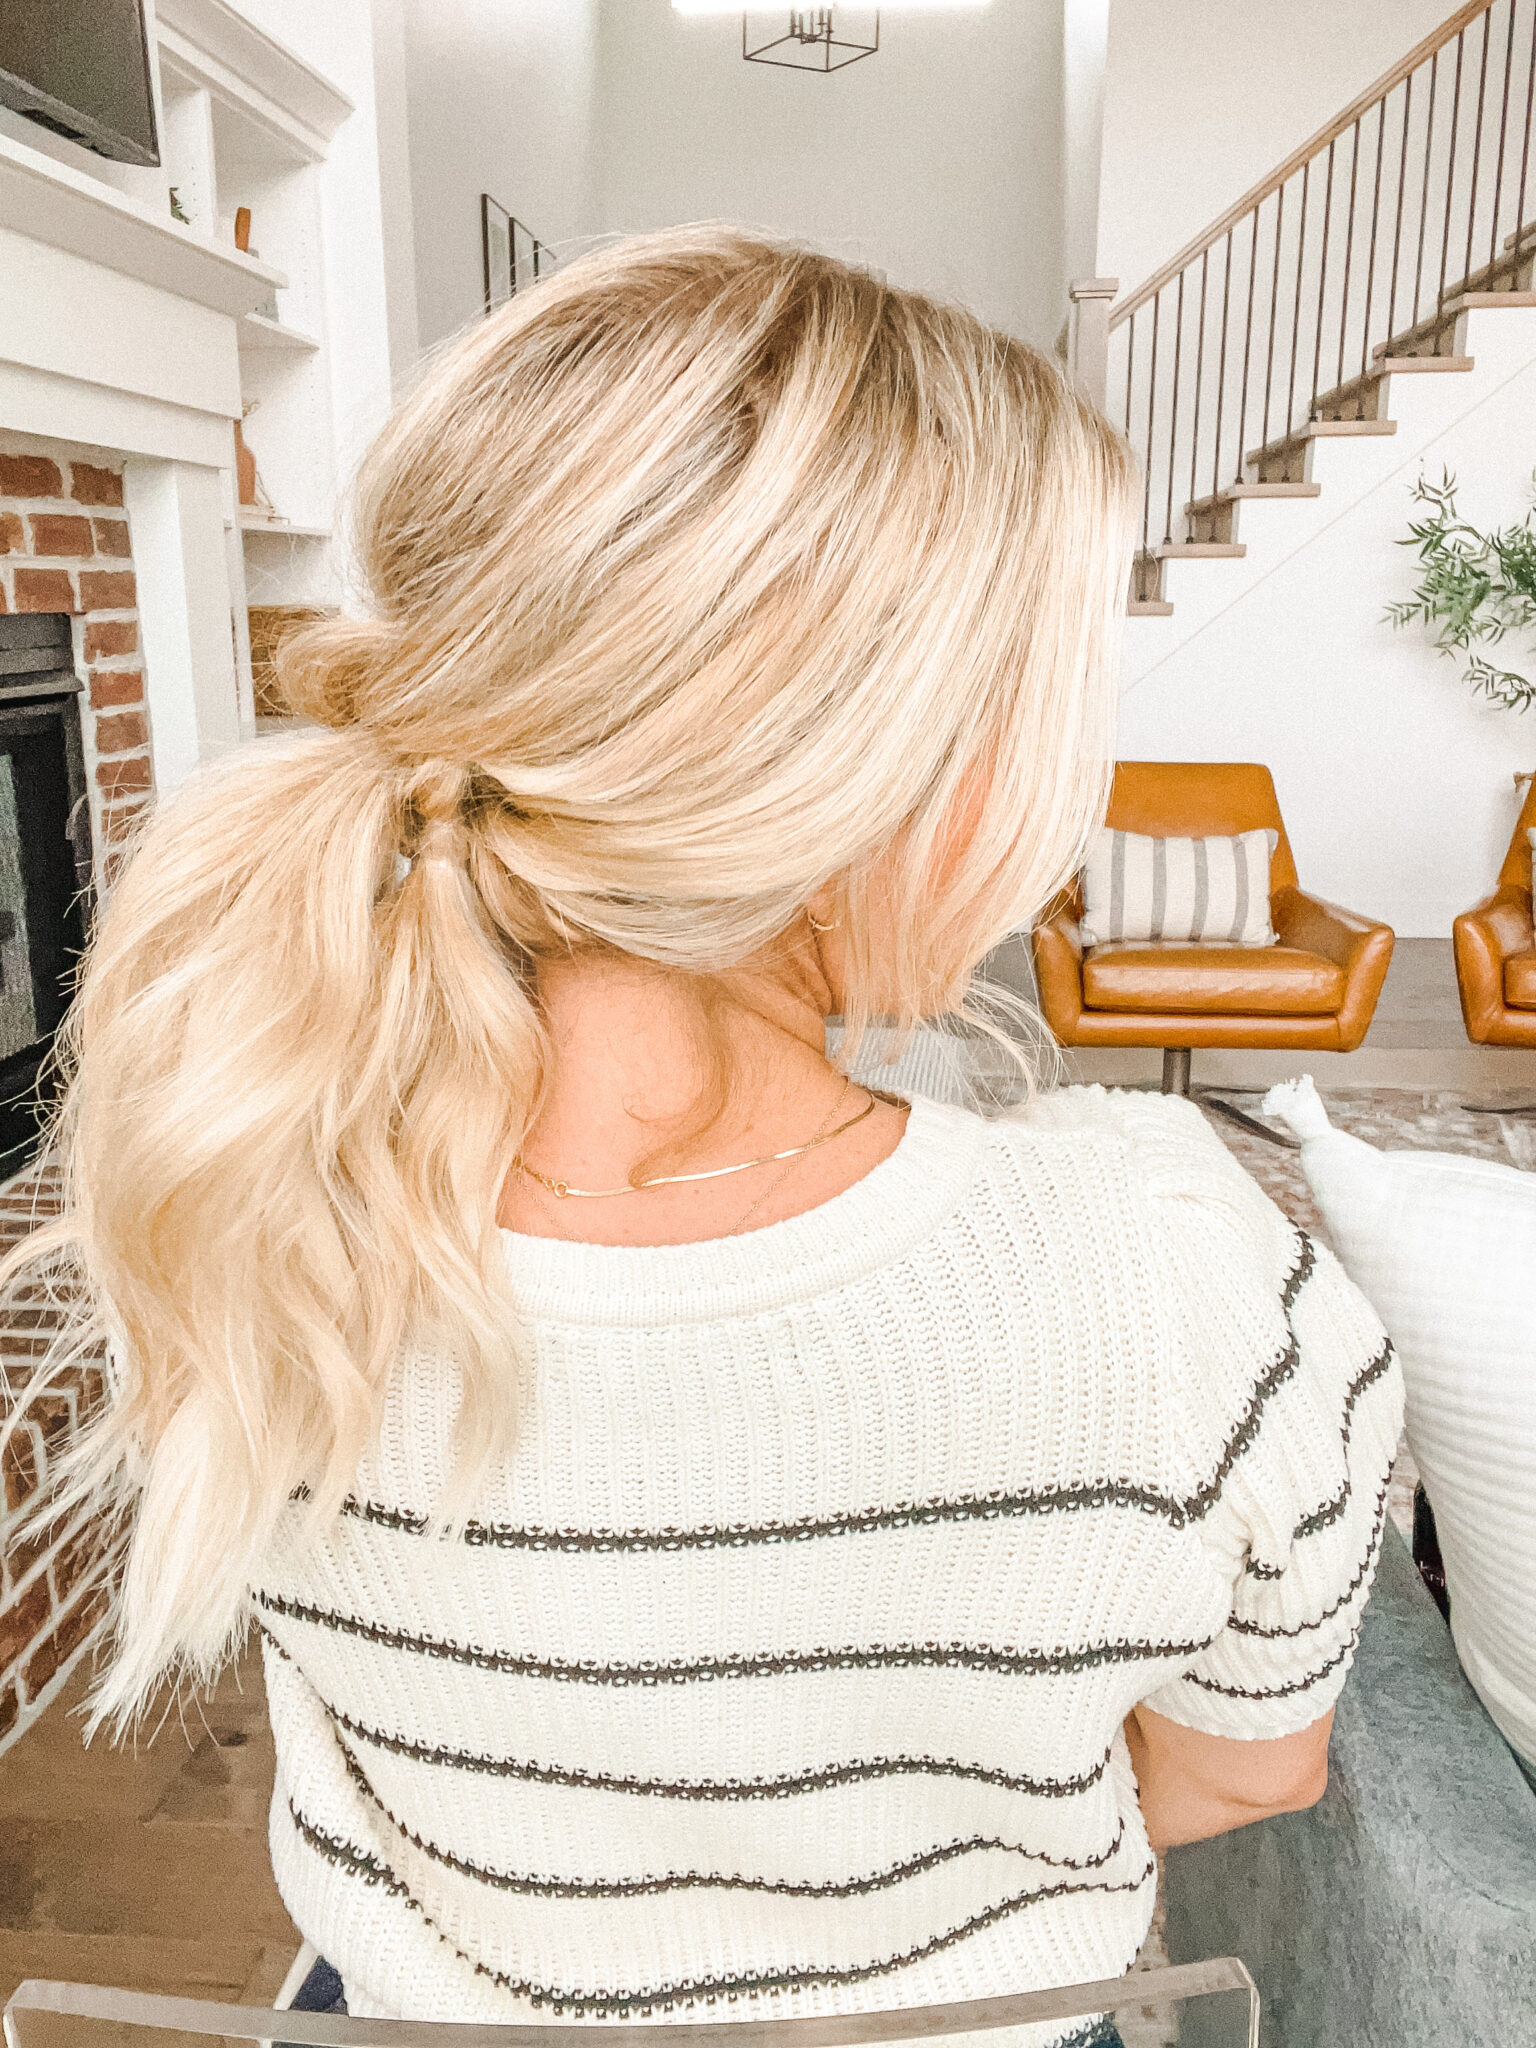 50 Pretty Easy Messy Ponytail Hairstyles You Can Try - Hairstyles Weekly